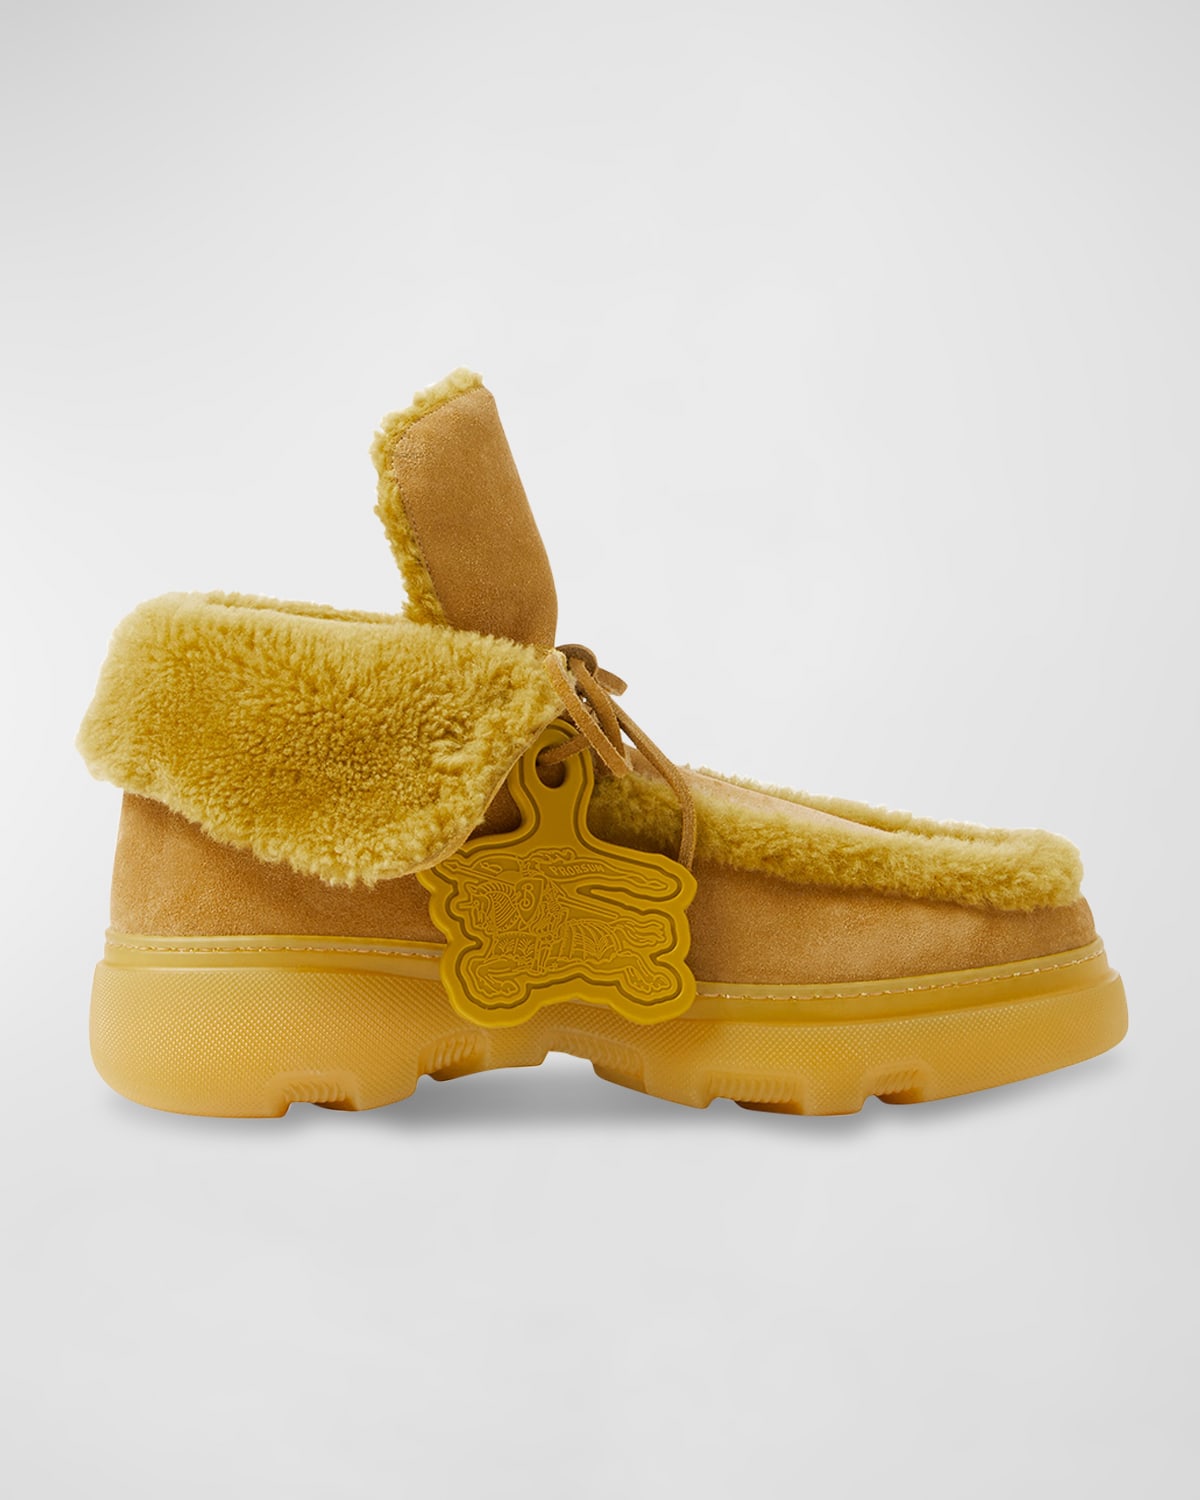 BURBERRY CREEPER SUEDE & SHEARLING BOOTIES